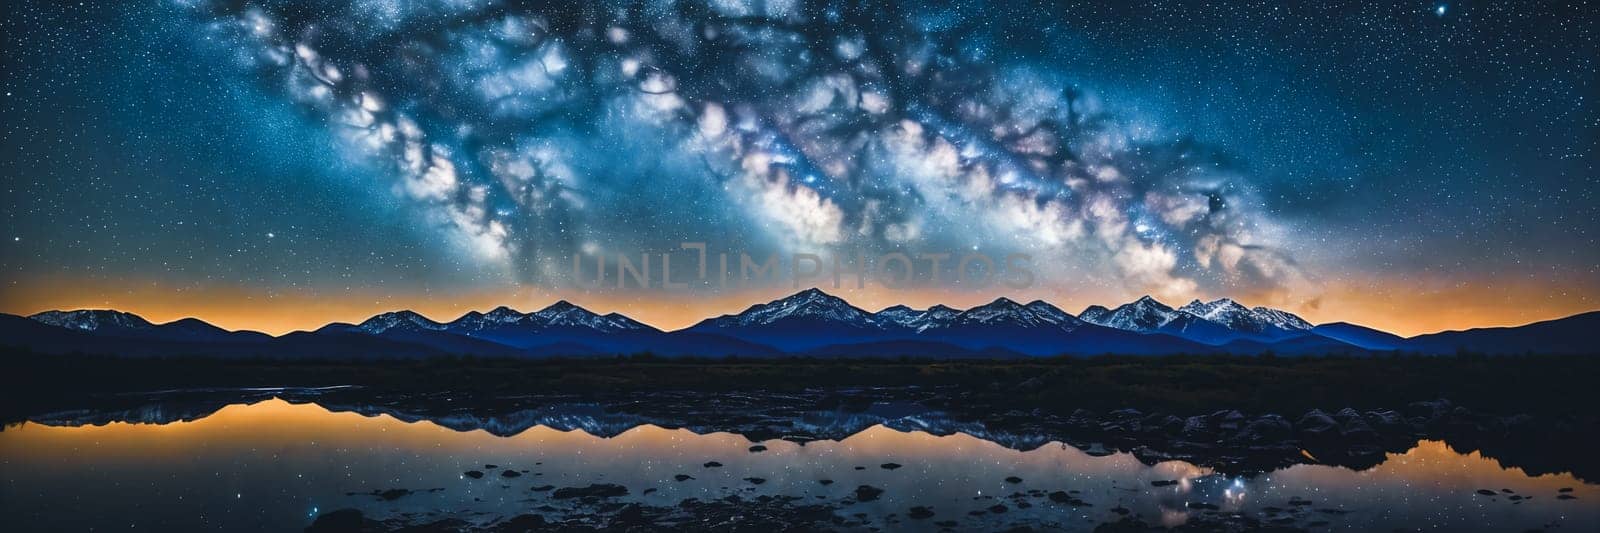 Marvel of a starry night sky in a remote location, with a silhouette of a distant mountain by GoodOlga